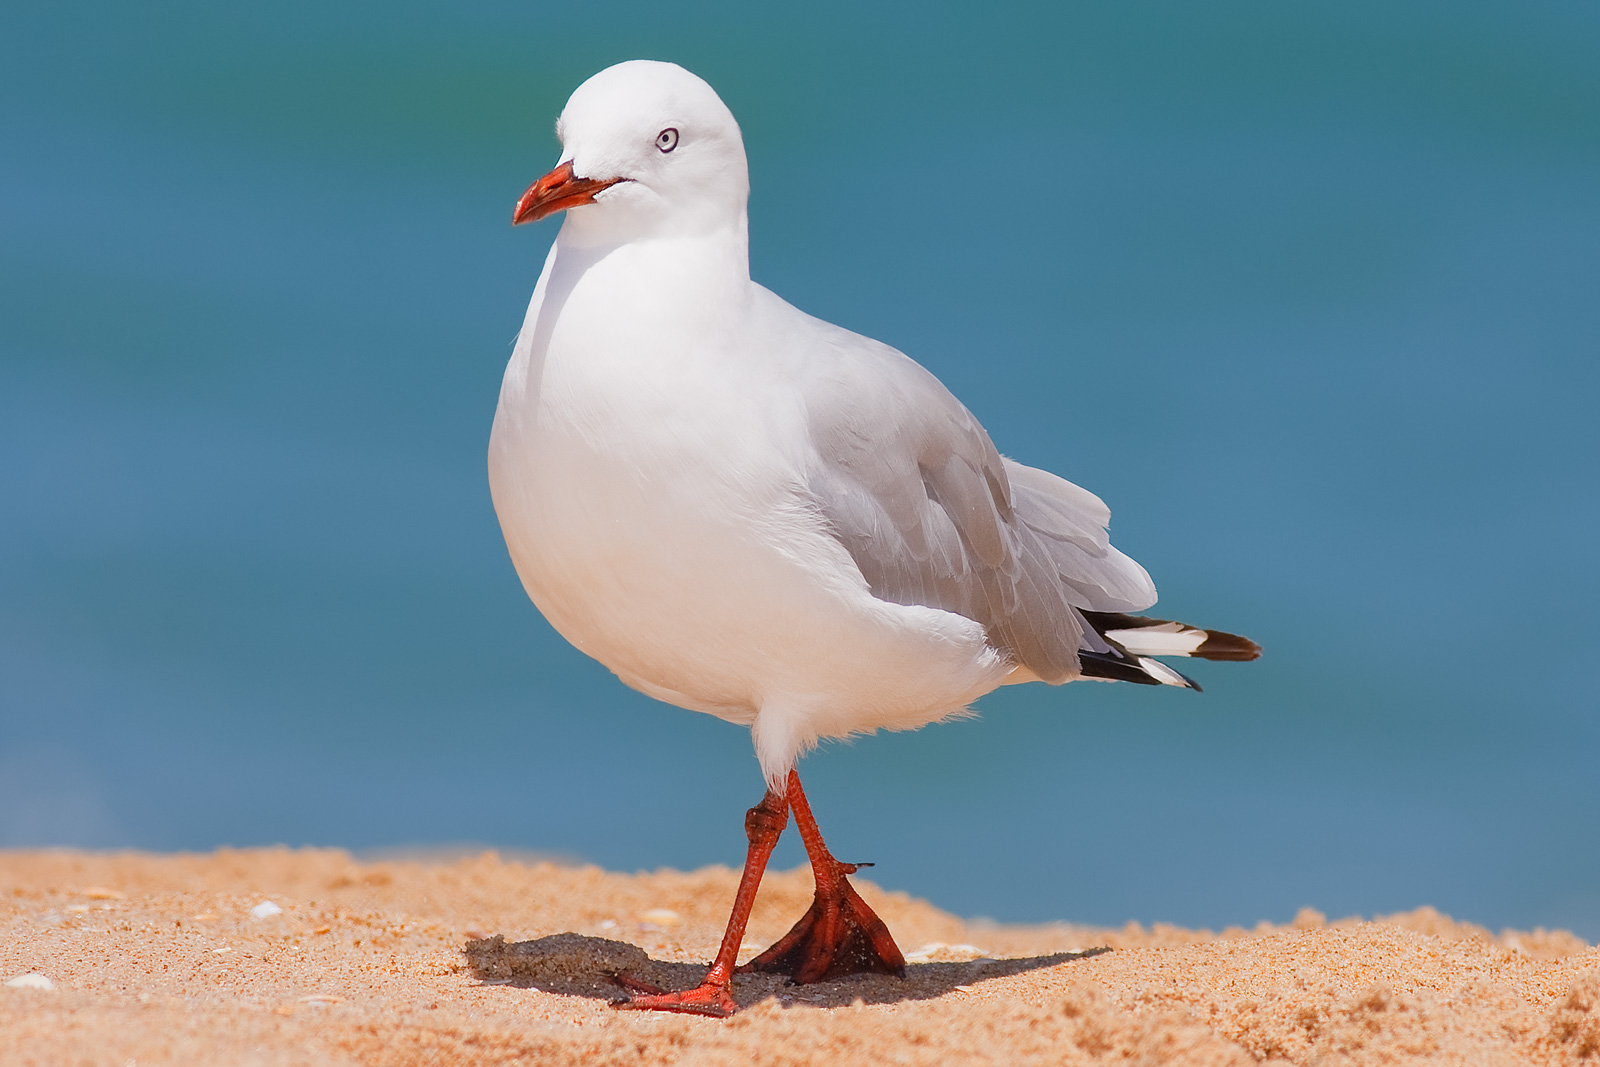 How many seagulls are there in Australia?